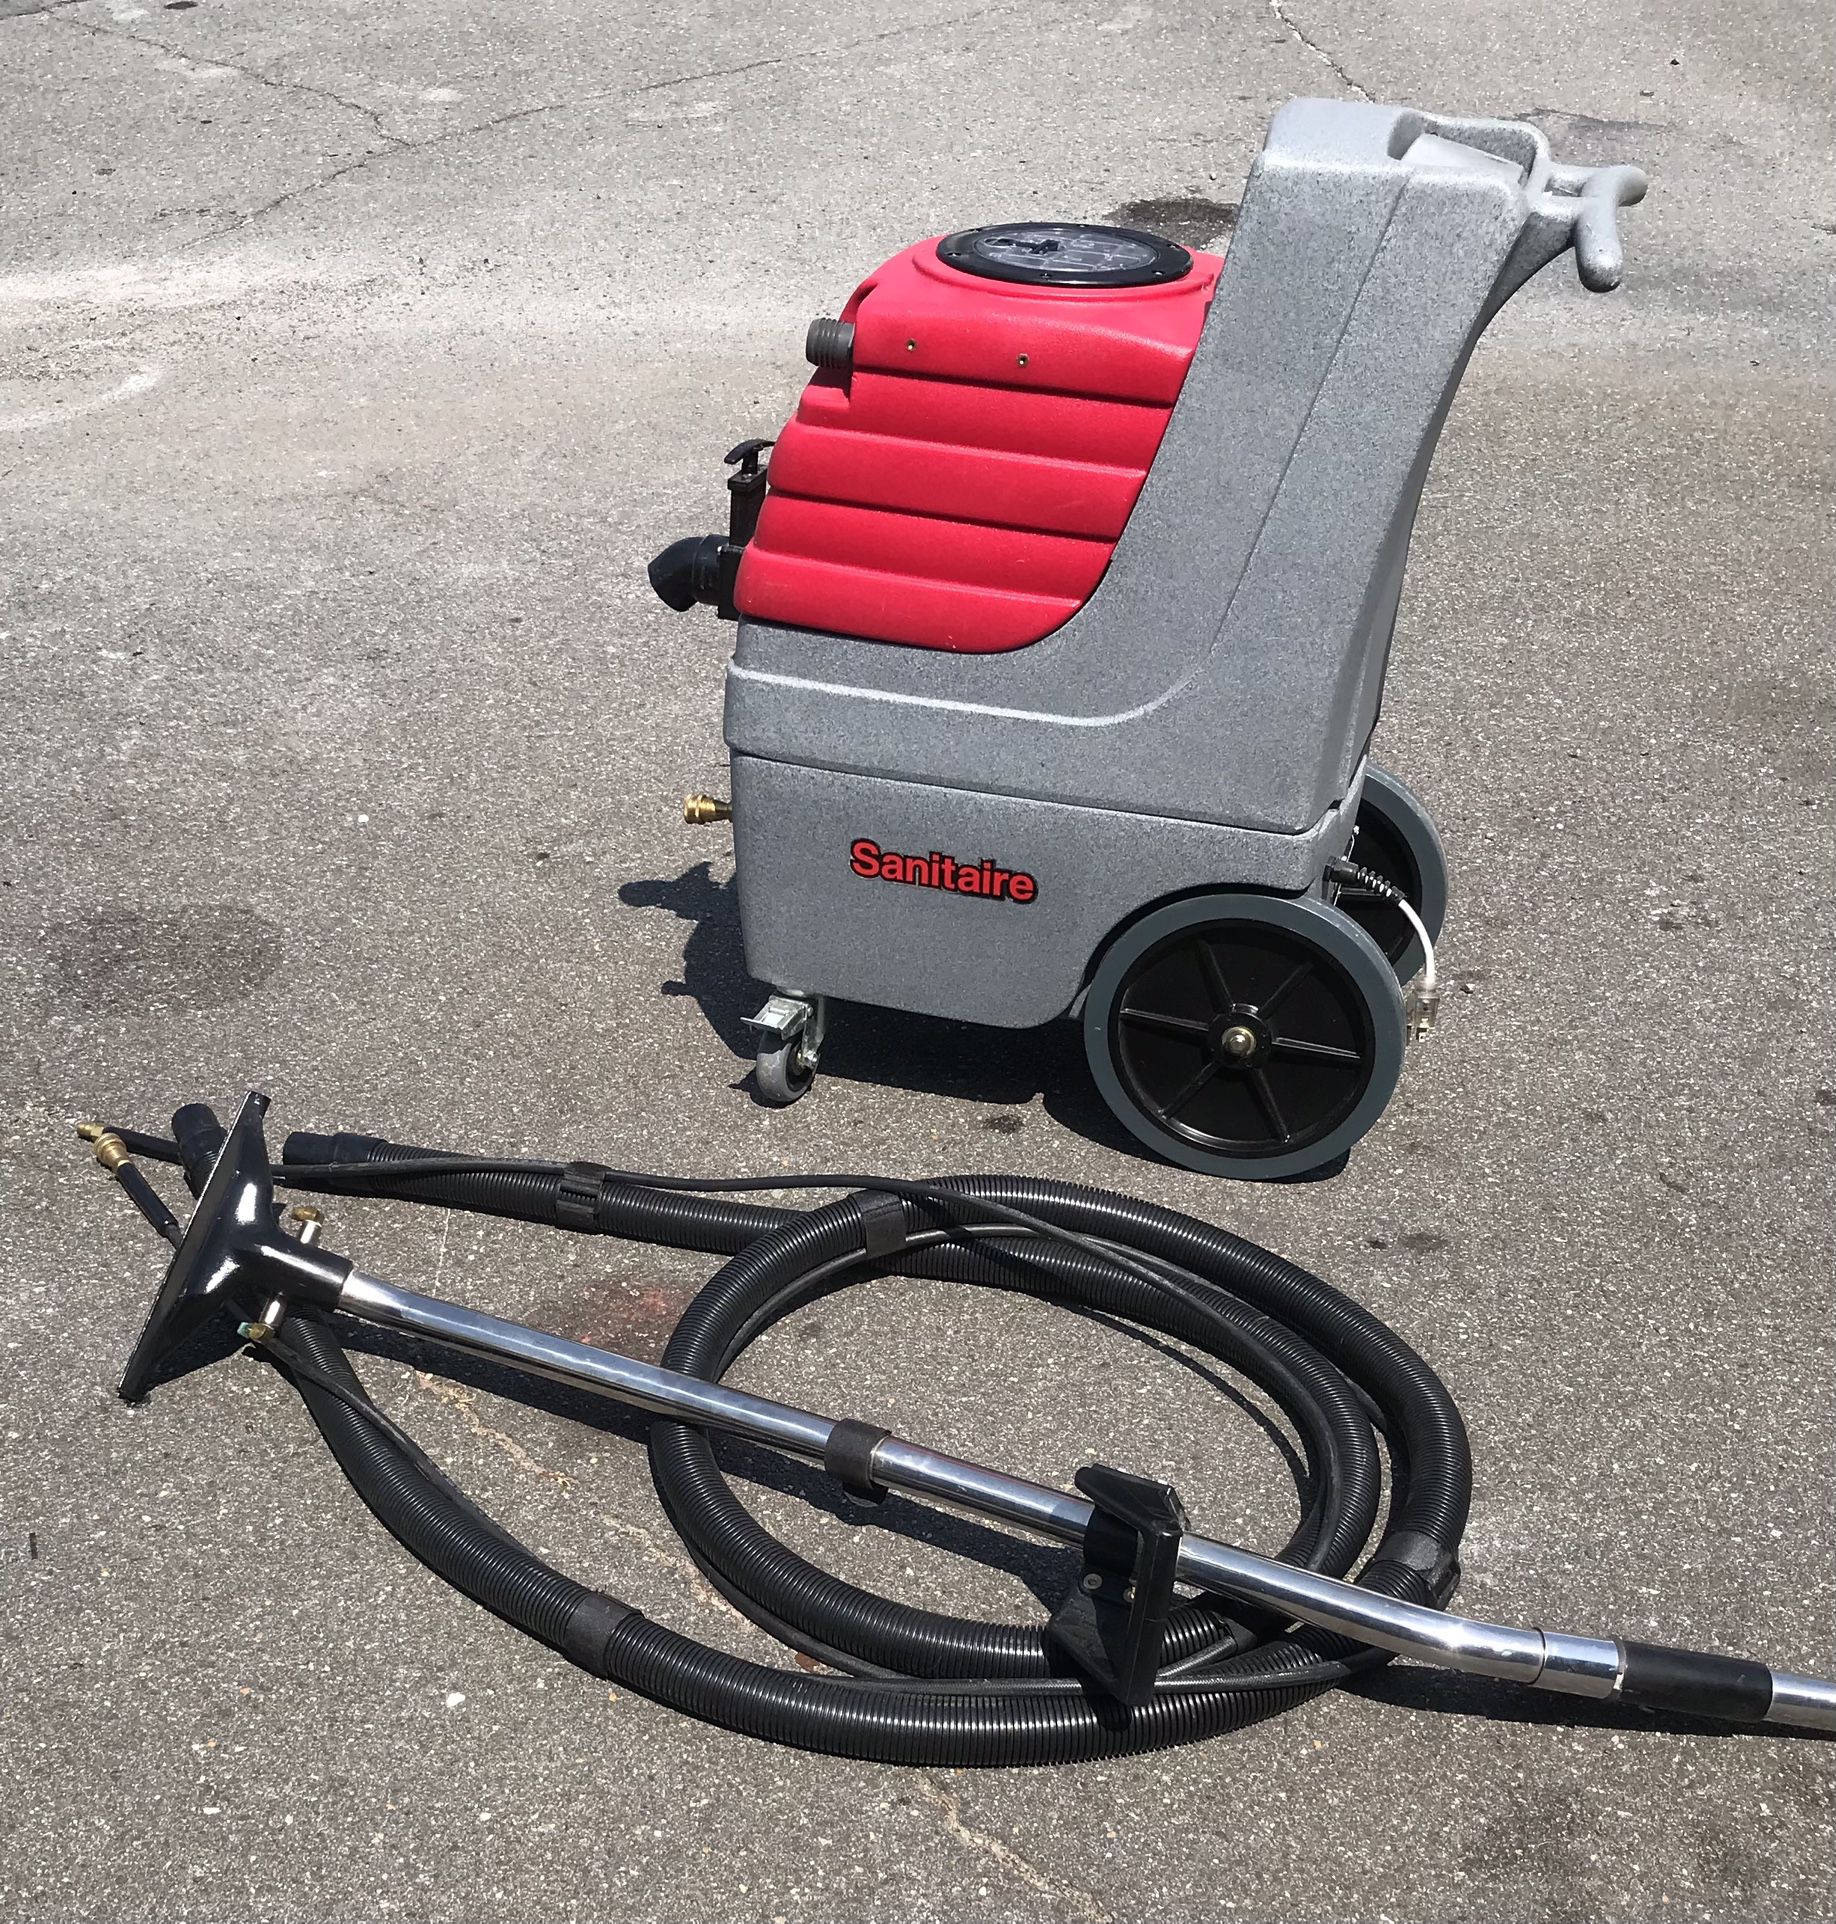 Commercial Carpet Cleaner/ Extractor Sanitaire SC6080A W/ Hoses & Wand 